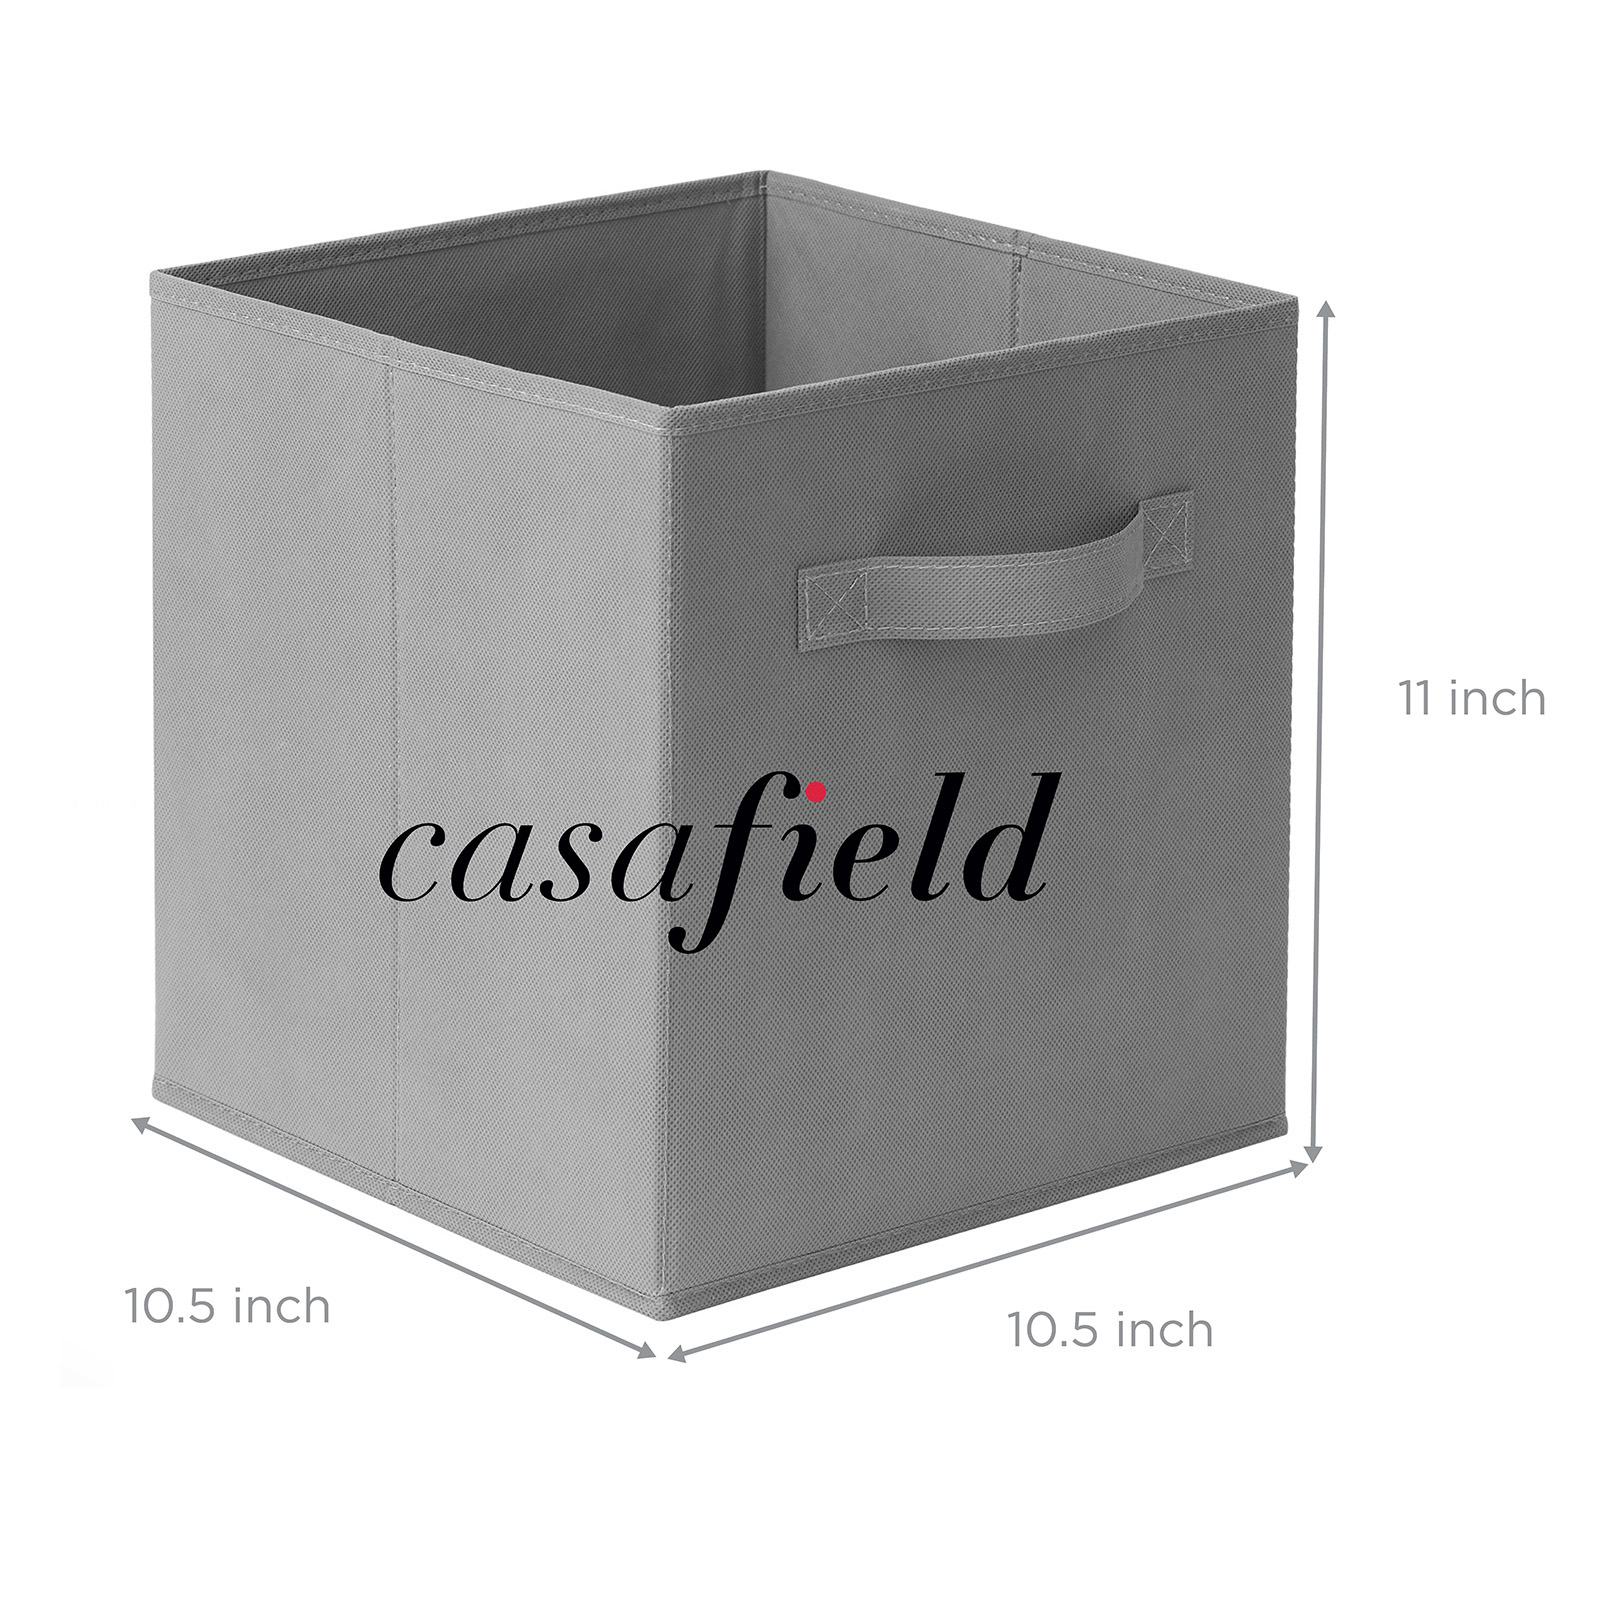 Casafield Set of 6 Collapsible Fabric Cube Storage Bins - 11" Foldable Cloth Baskets for Shelves, Cubby Organizers & More - image 4 of 7